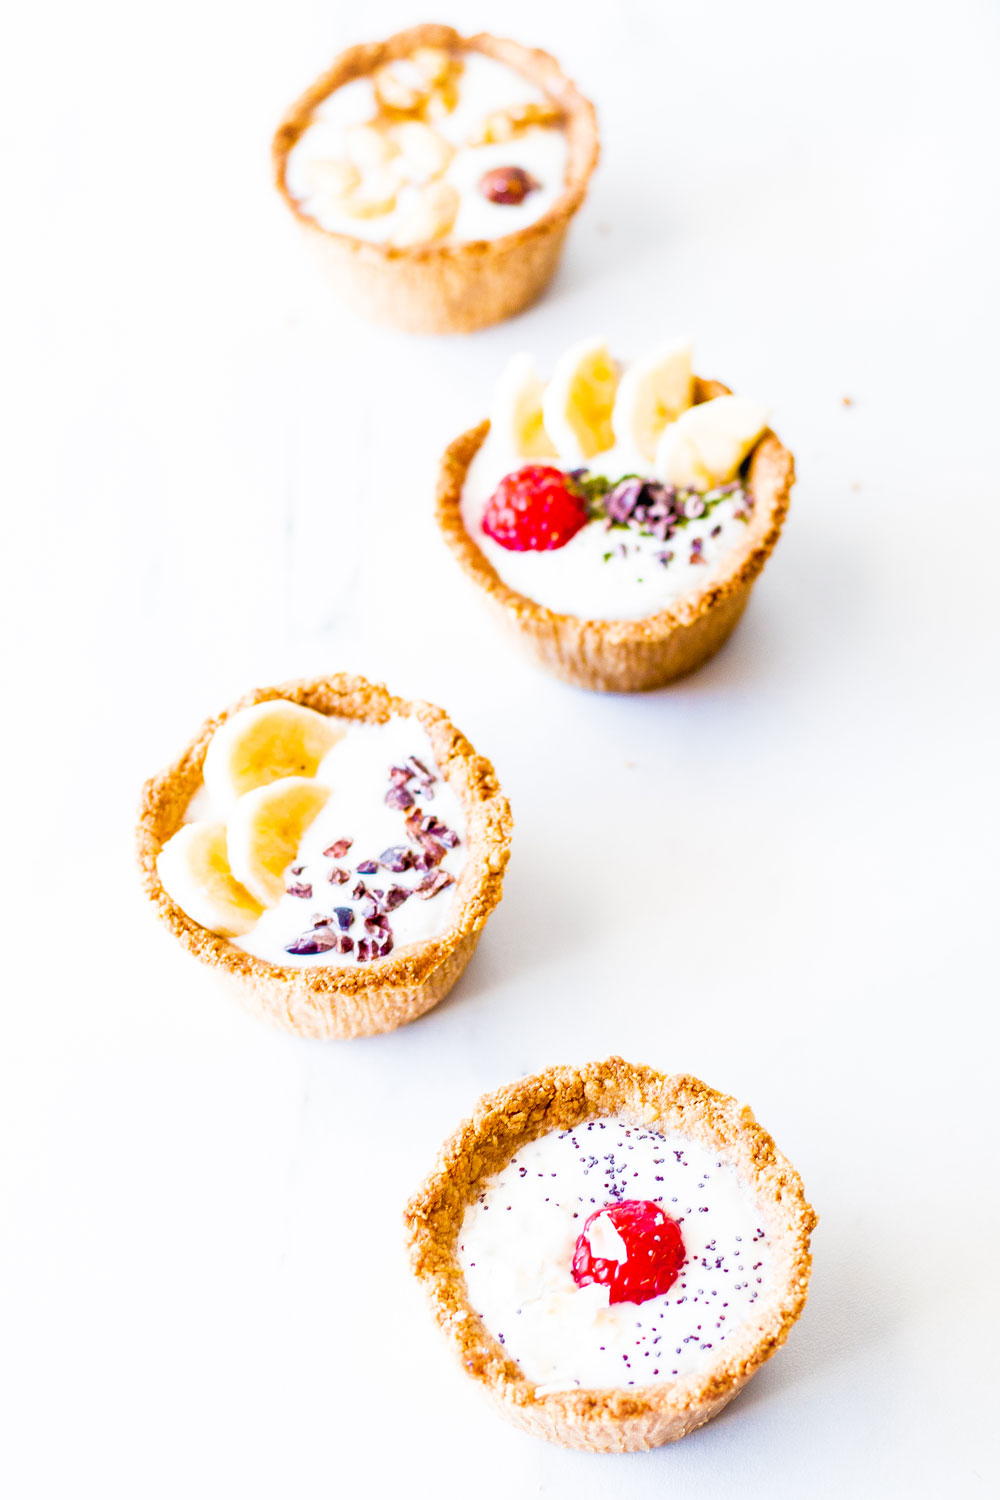 Breakfast is the best time to give your bone health a lift. And eating calcium-rich foods in the morning, like these Yummy Granola and Yogurt Breakfast Cups, is the best way to do just that! https://www.spotebi.com/recipes/yummy-granola-yogurt-breakfast-cups/